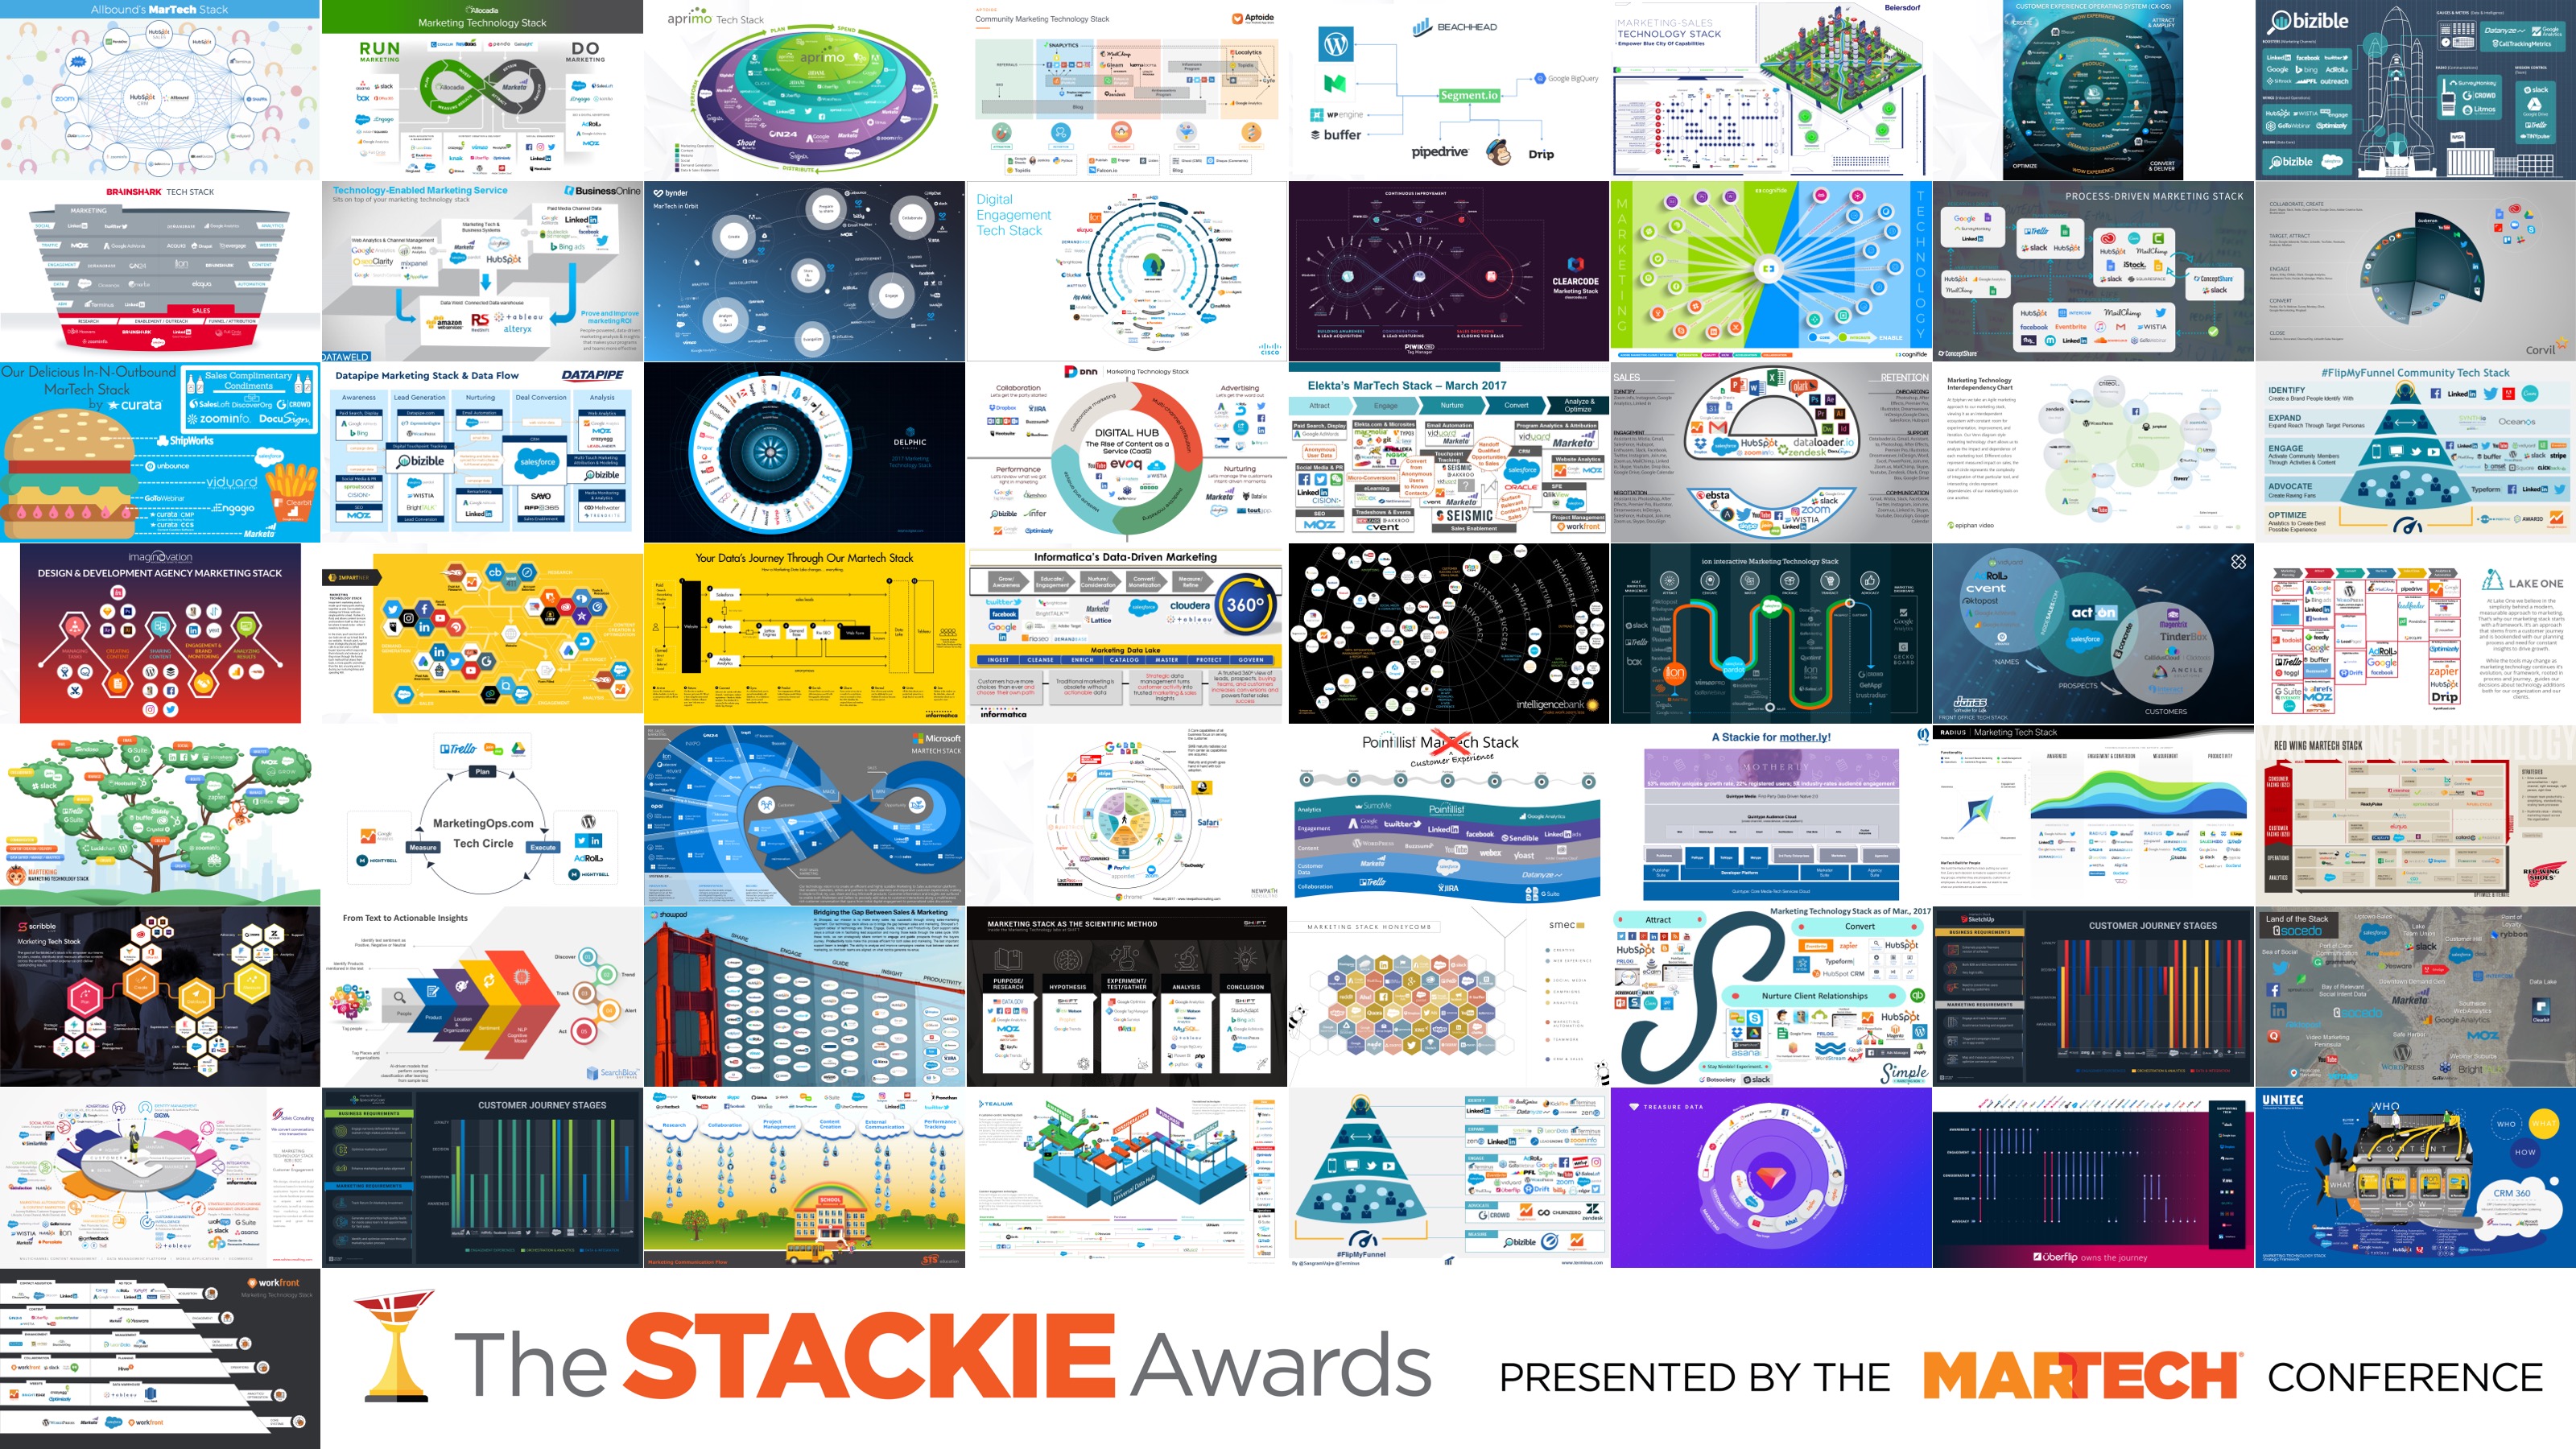 Stackie Awards MarTech Conference | Uberflip